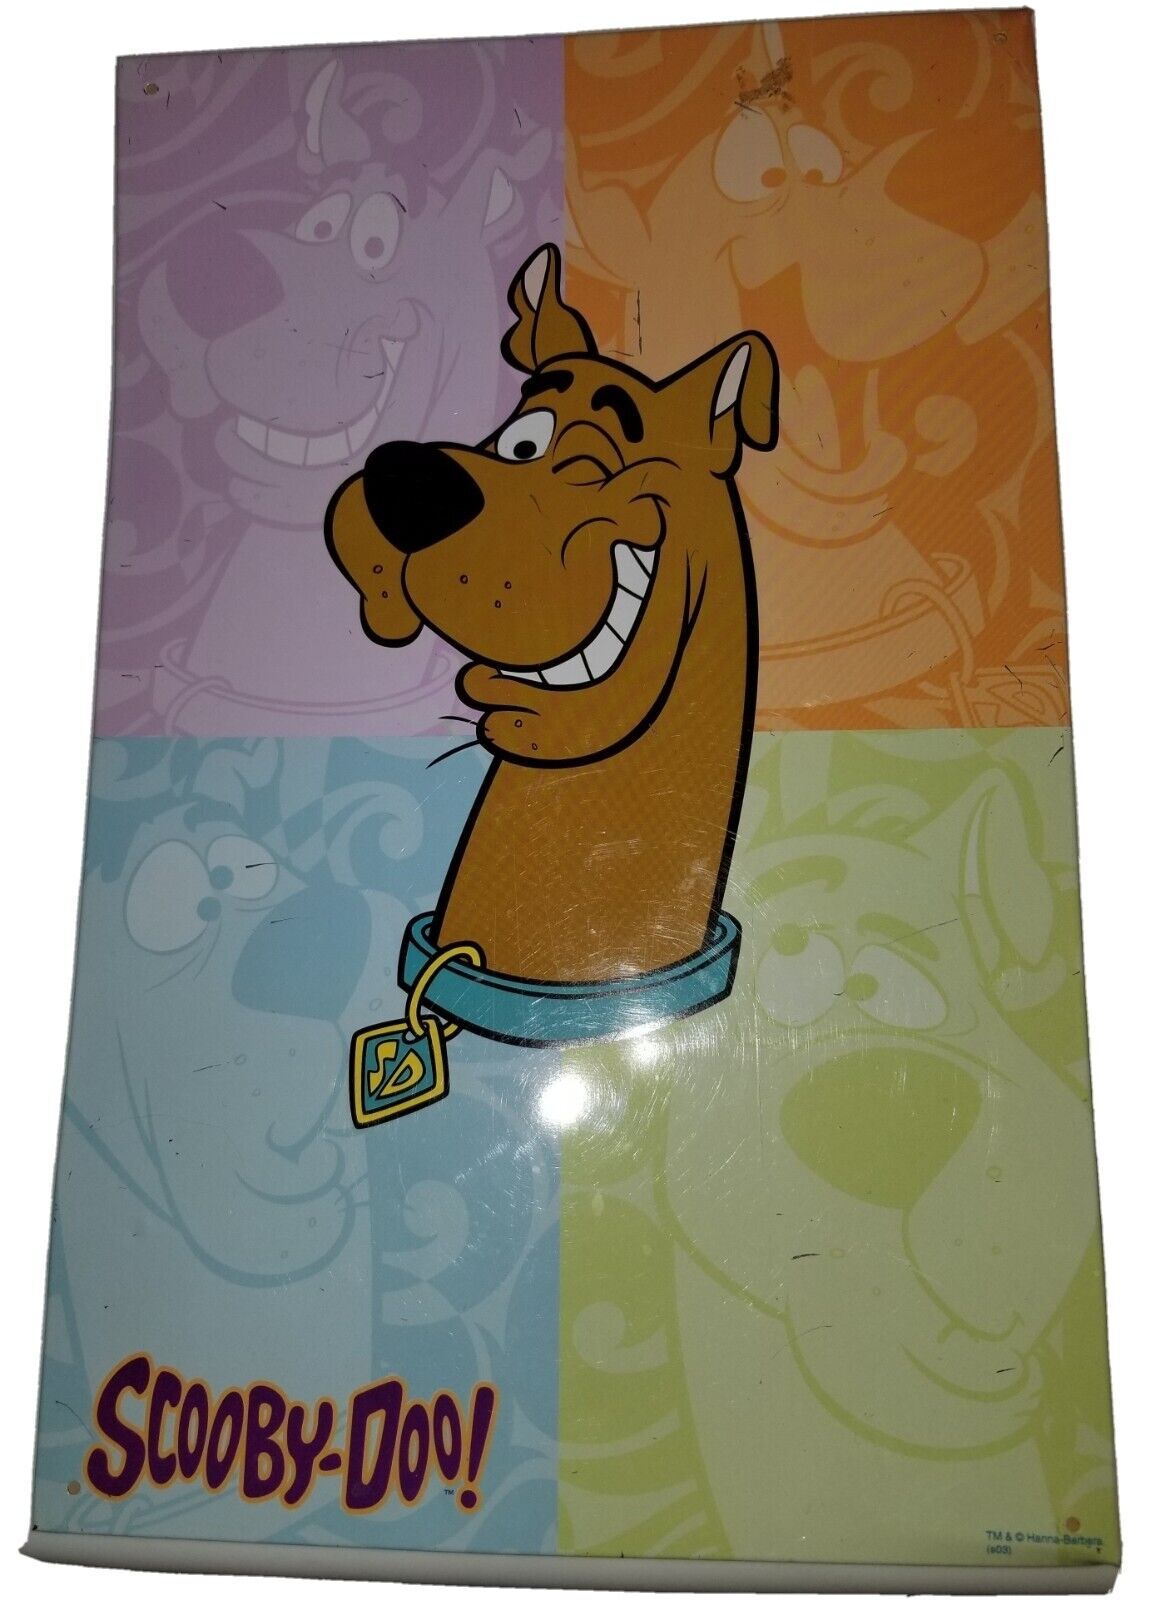 Scooby Doo Wall Hanging Decoration.  10 x 15 Inches.  Hanna Barbera